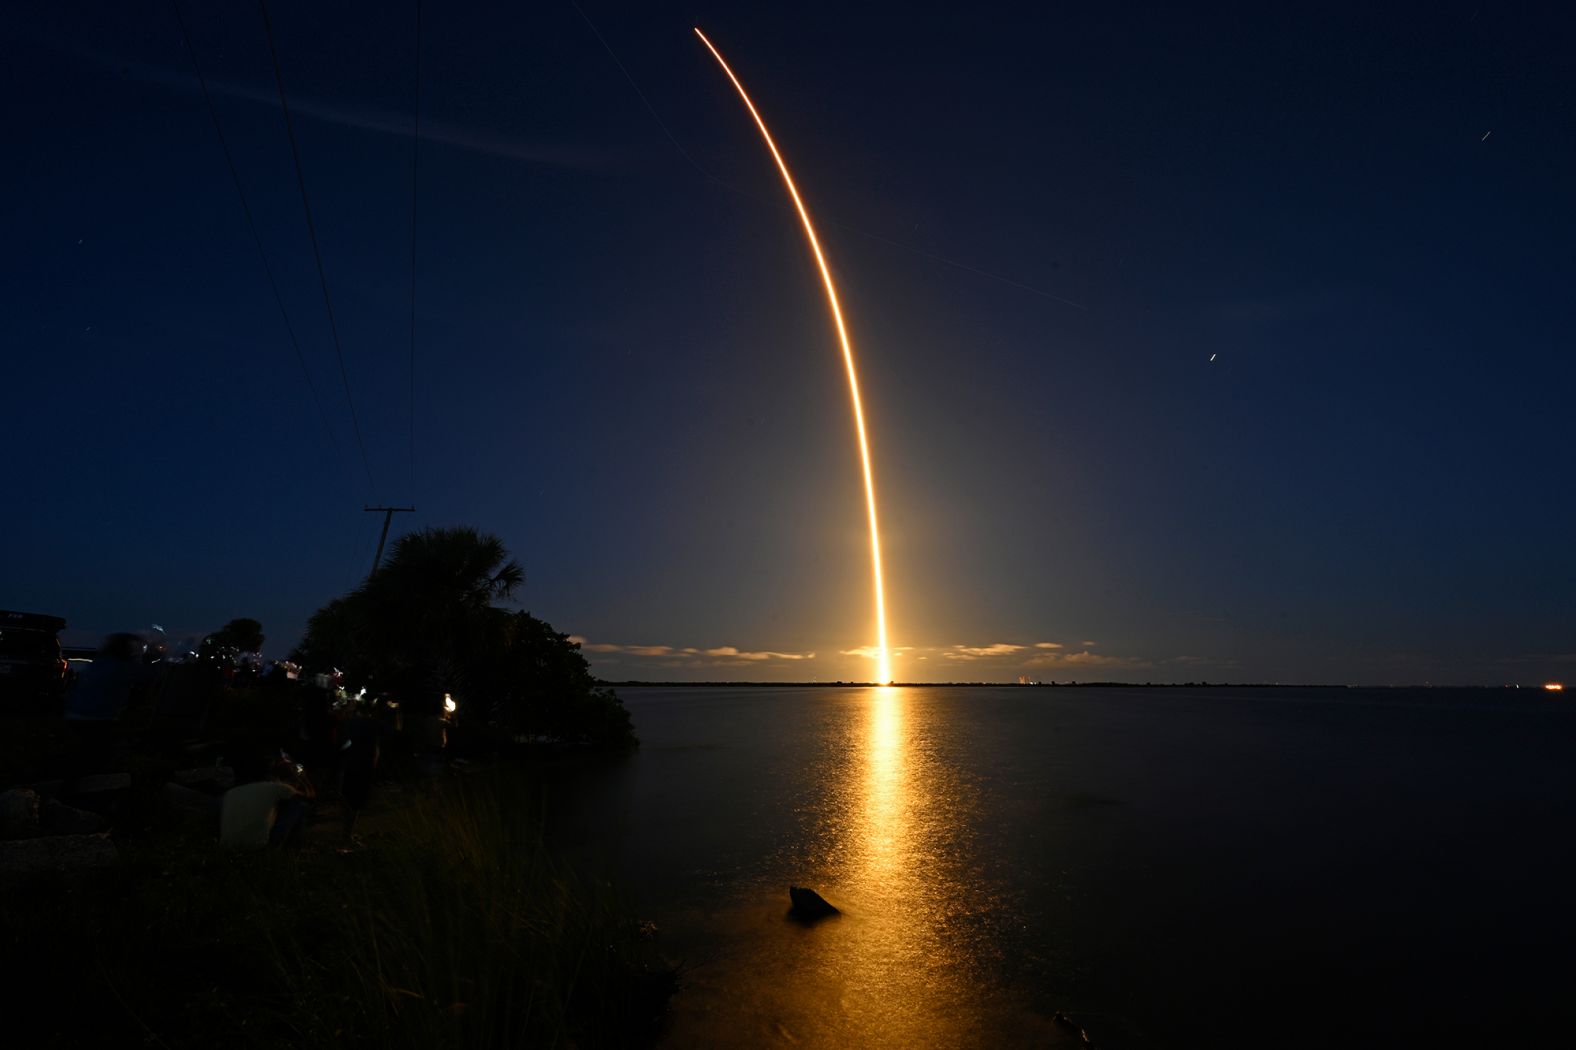 In this long-exposure photo, the Inspiration4 crew is seen launching into space.